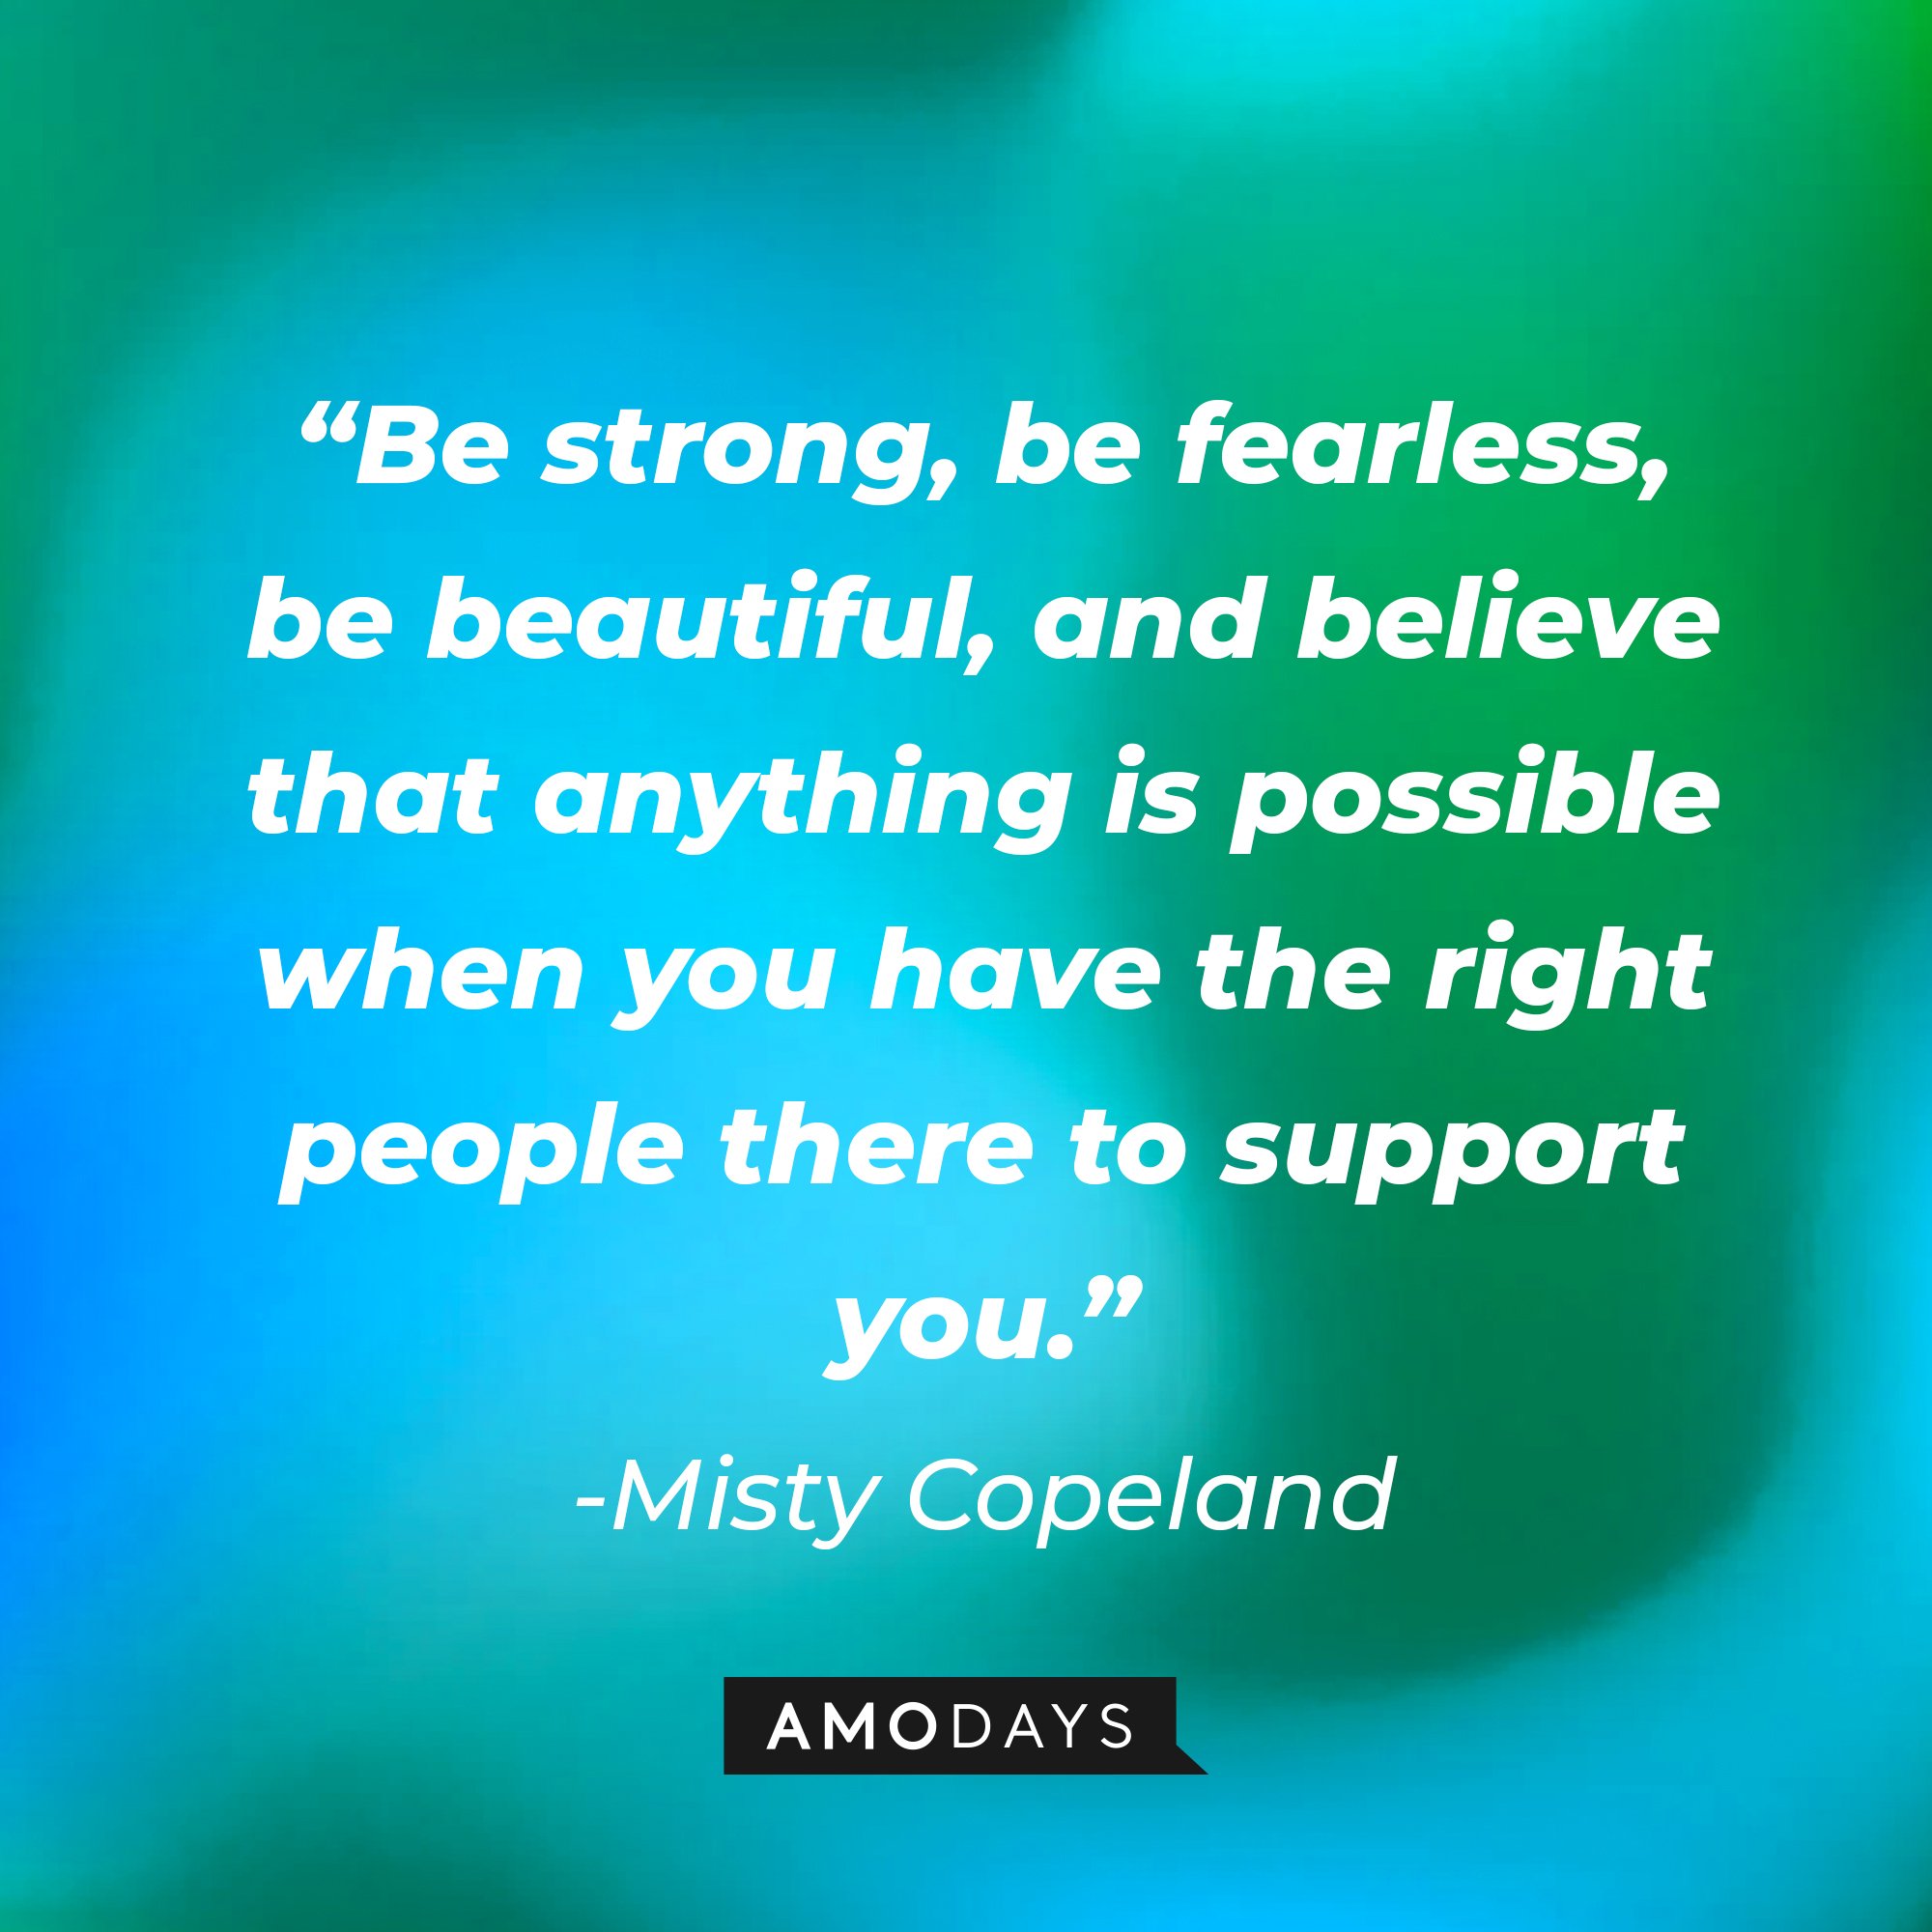 Misty Copeland’s quote: “Be strong, be fearless, be beautiful, and believe that anything is possible when you have the right people there to support you.” | AmoDays